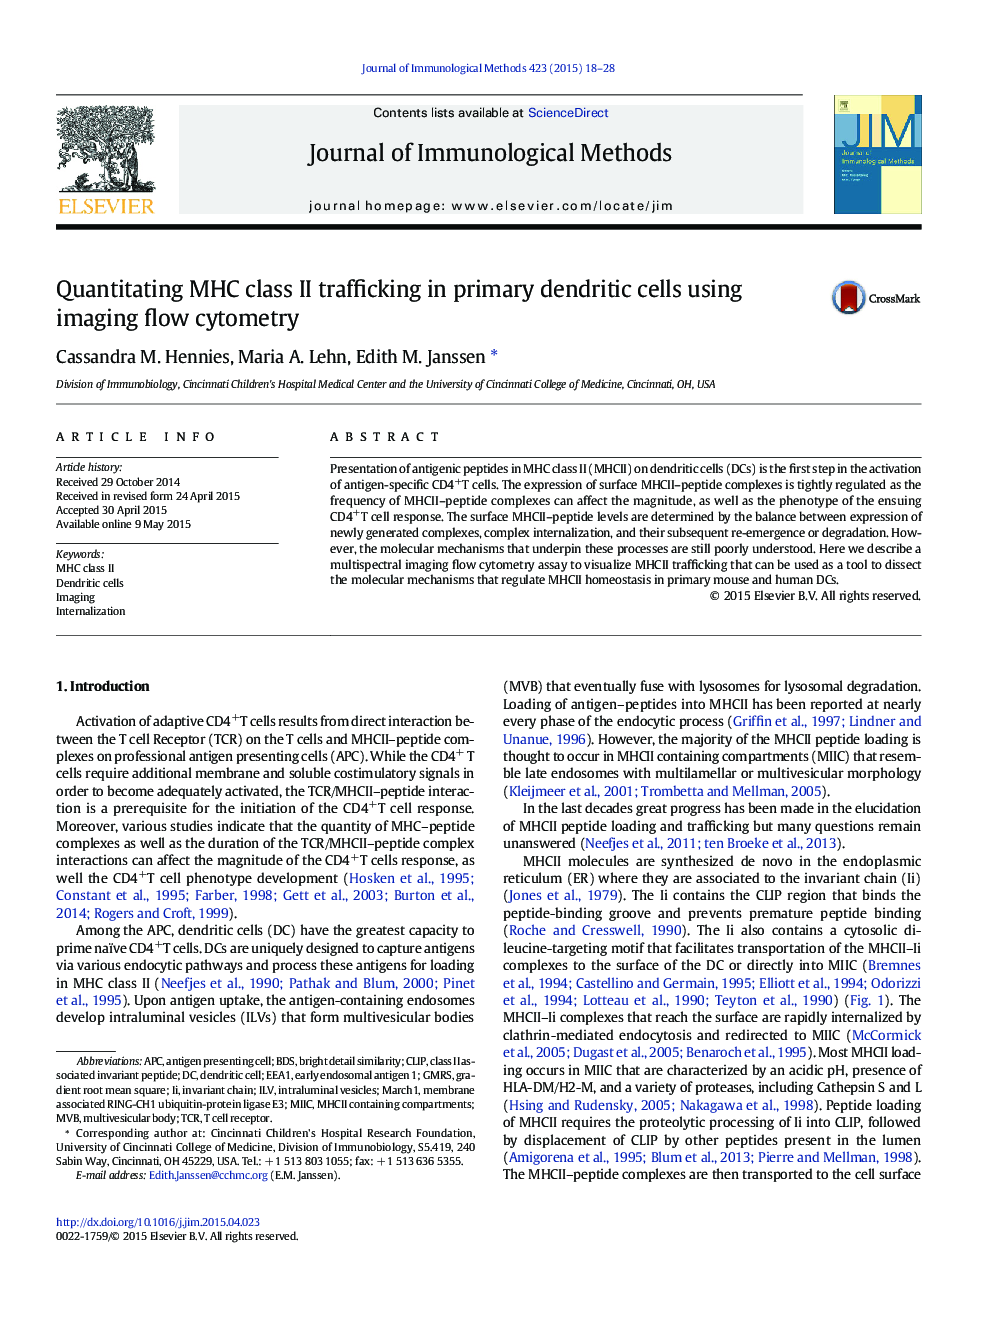 Quantitating MHC class II trafficking in primary dendritic cells using imaging flow cytometry